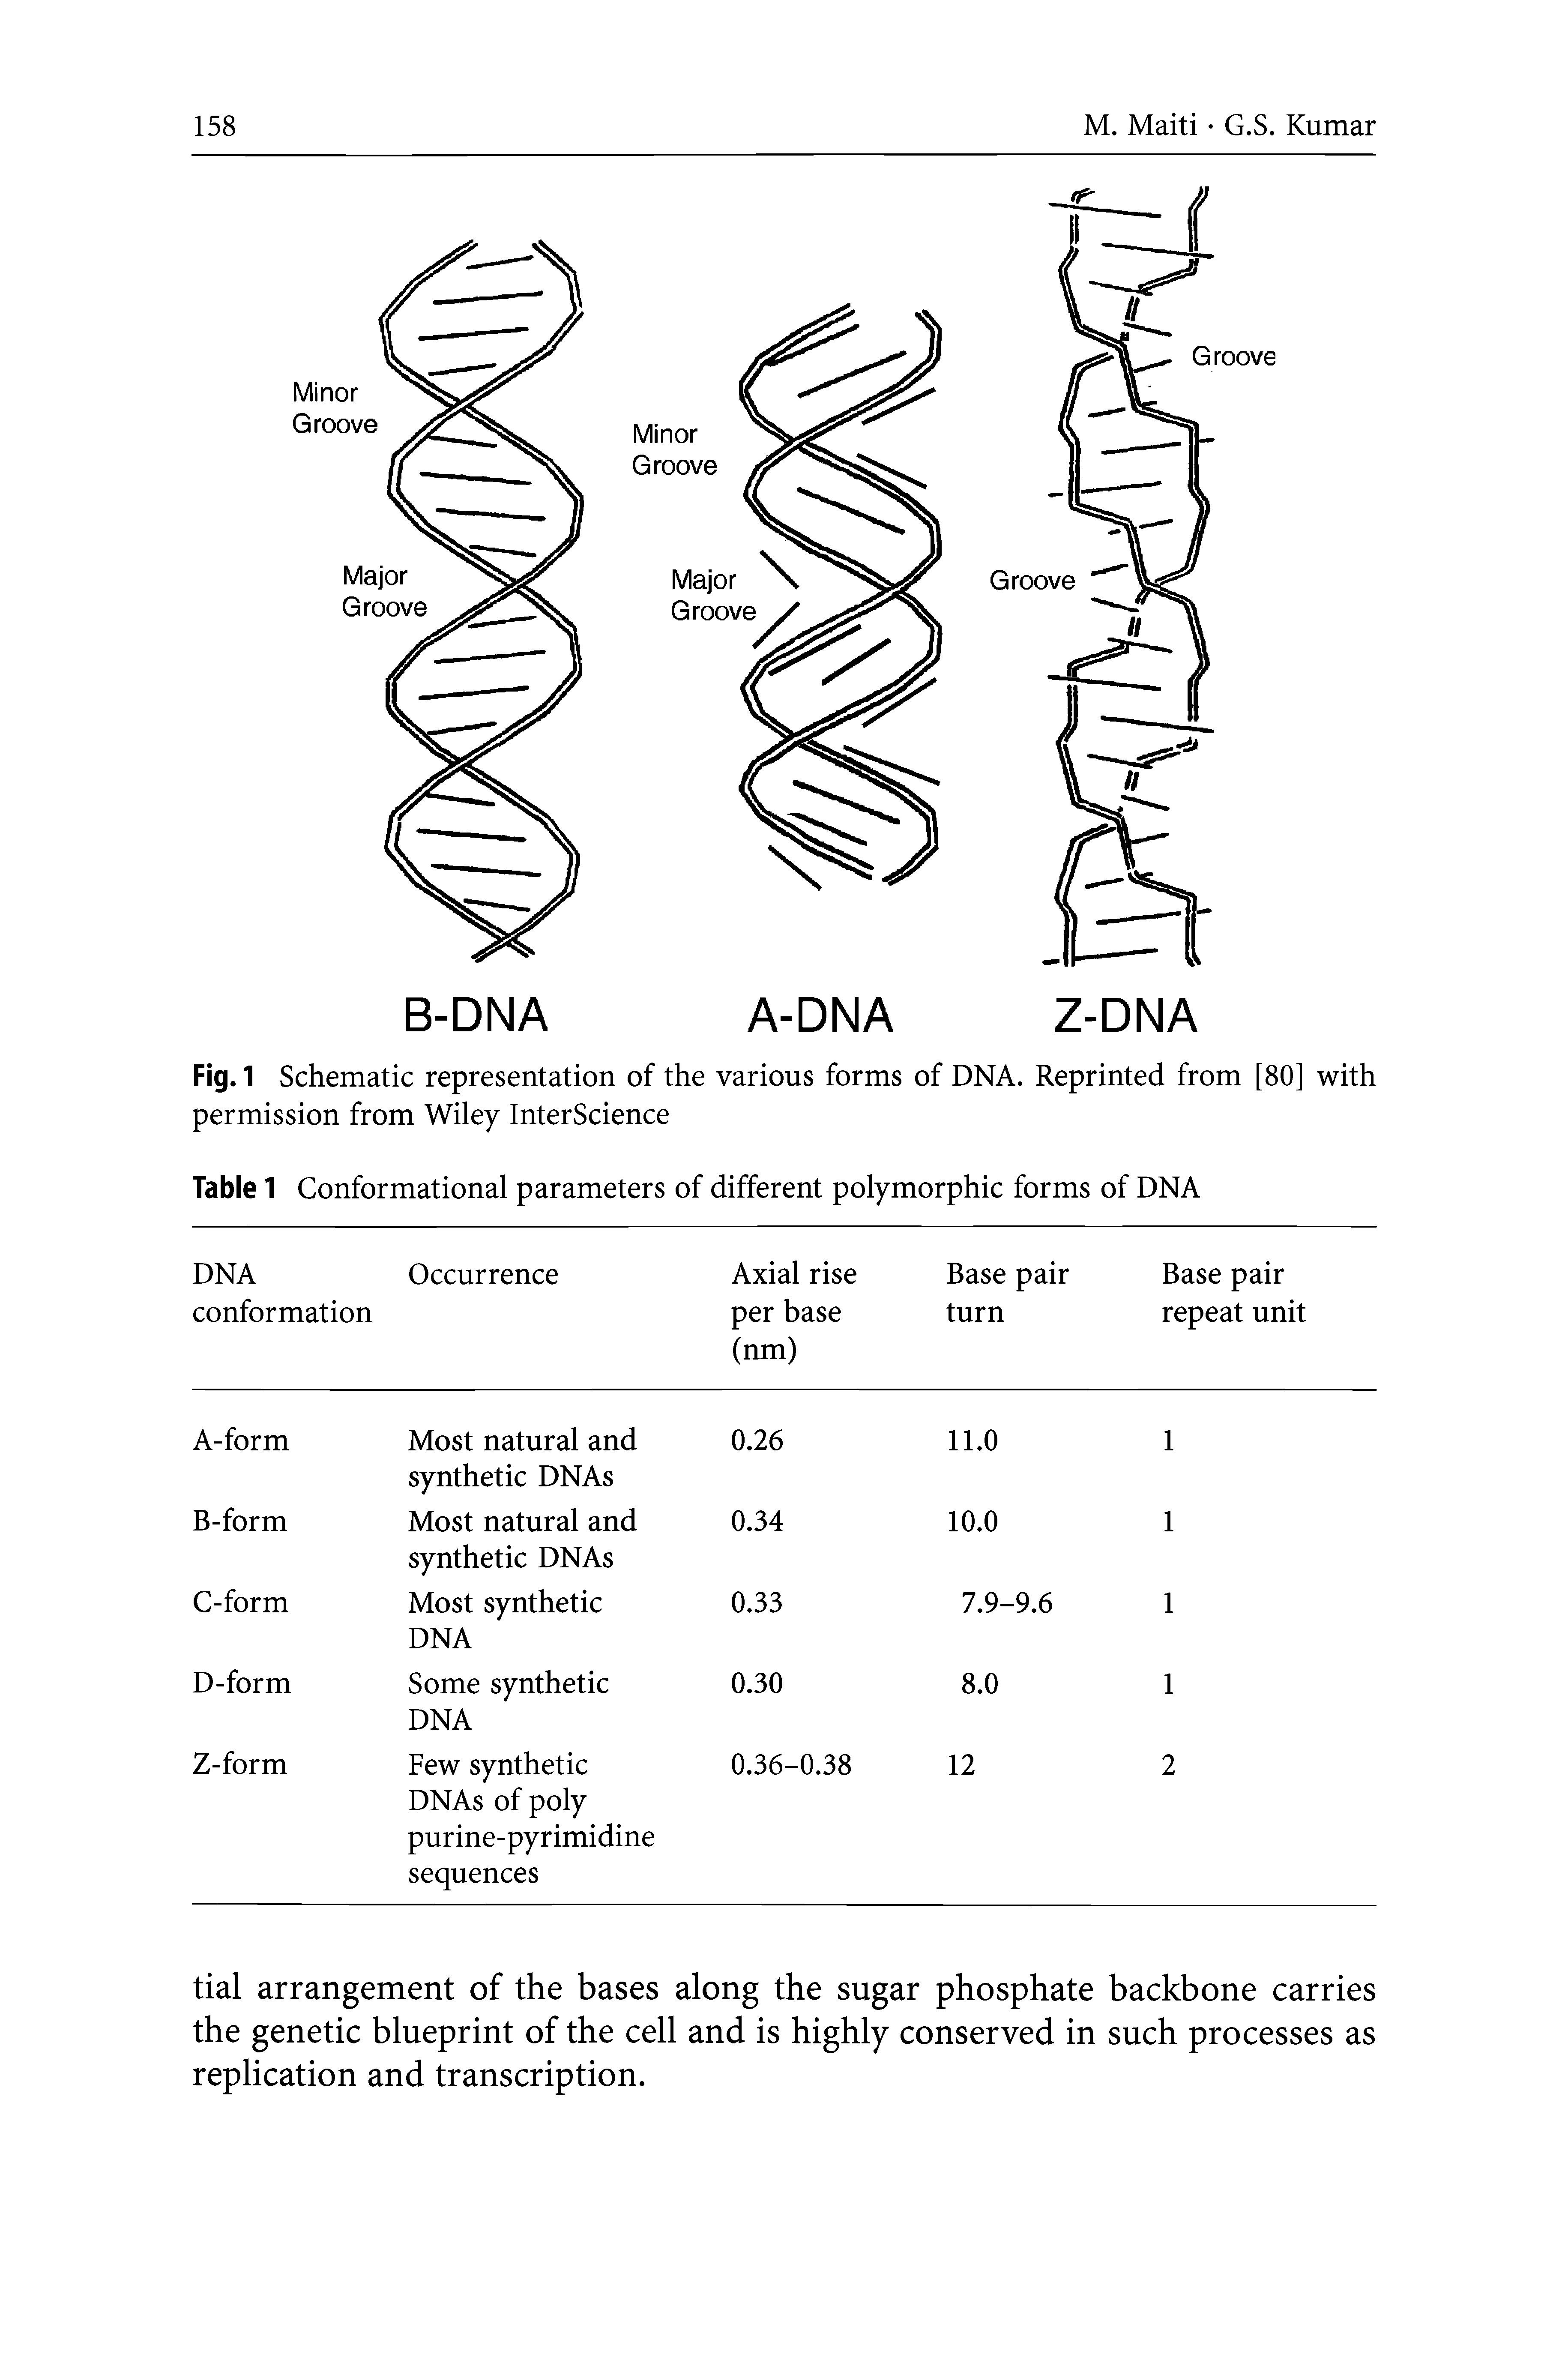 Table 1 Conformational parameters of different polymorphic forms of DNA...